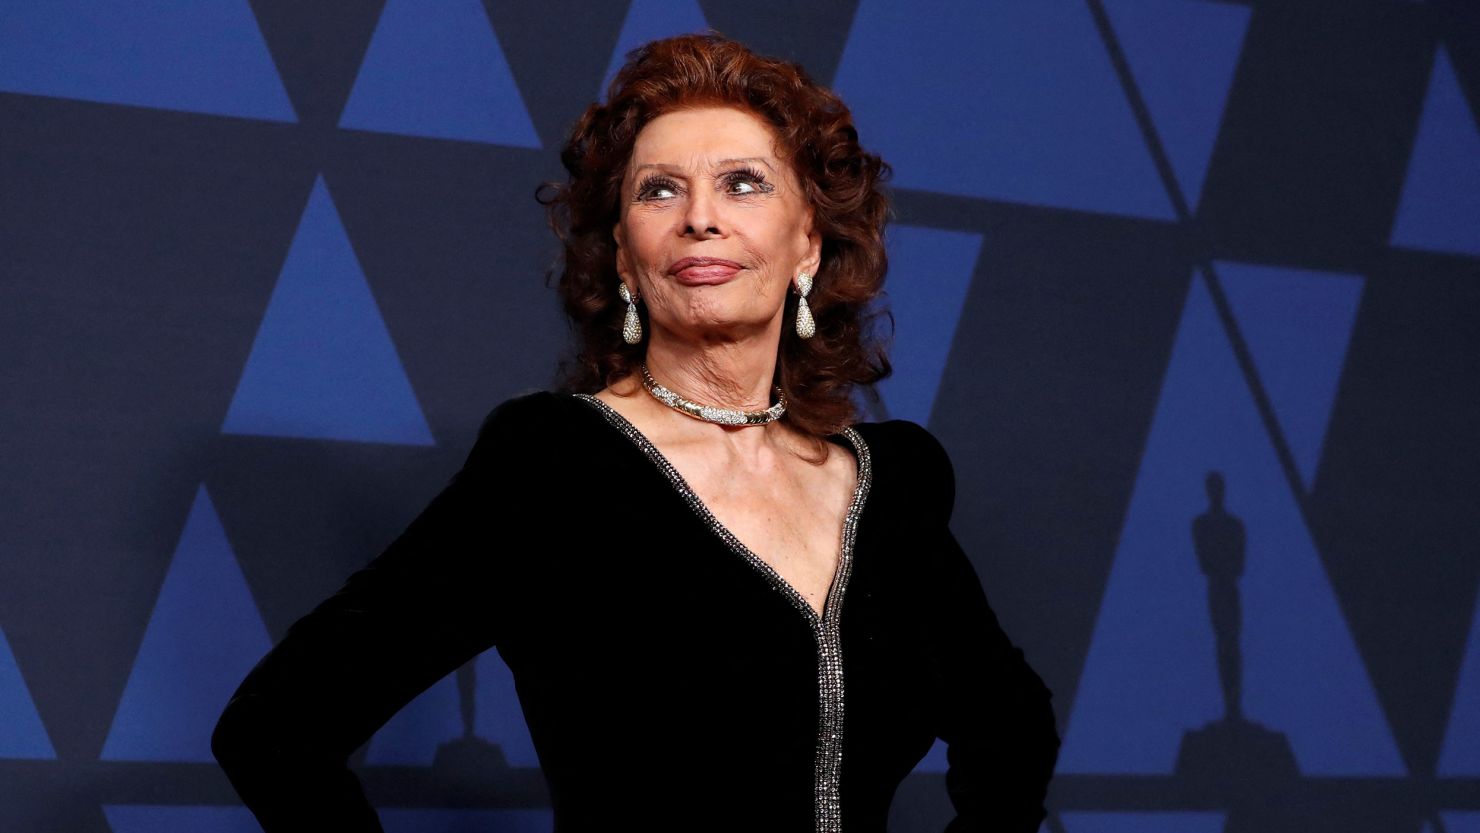 Sophia Loren at the 2019 Governors Awards in Hollywood, California. 